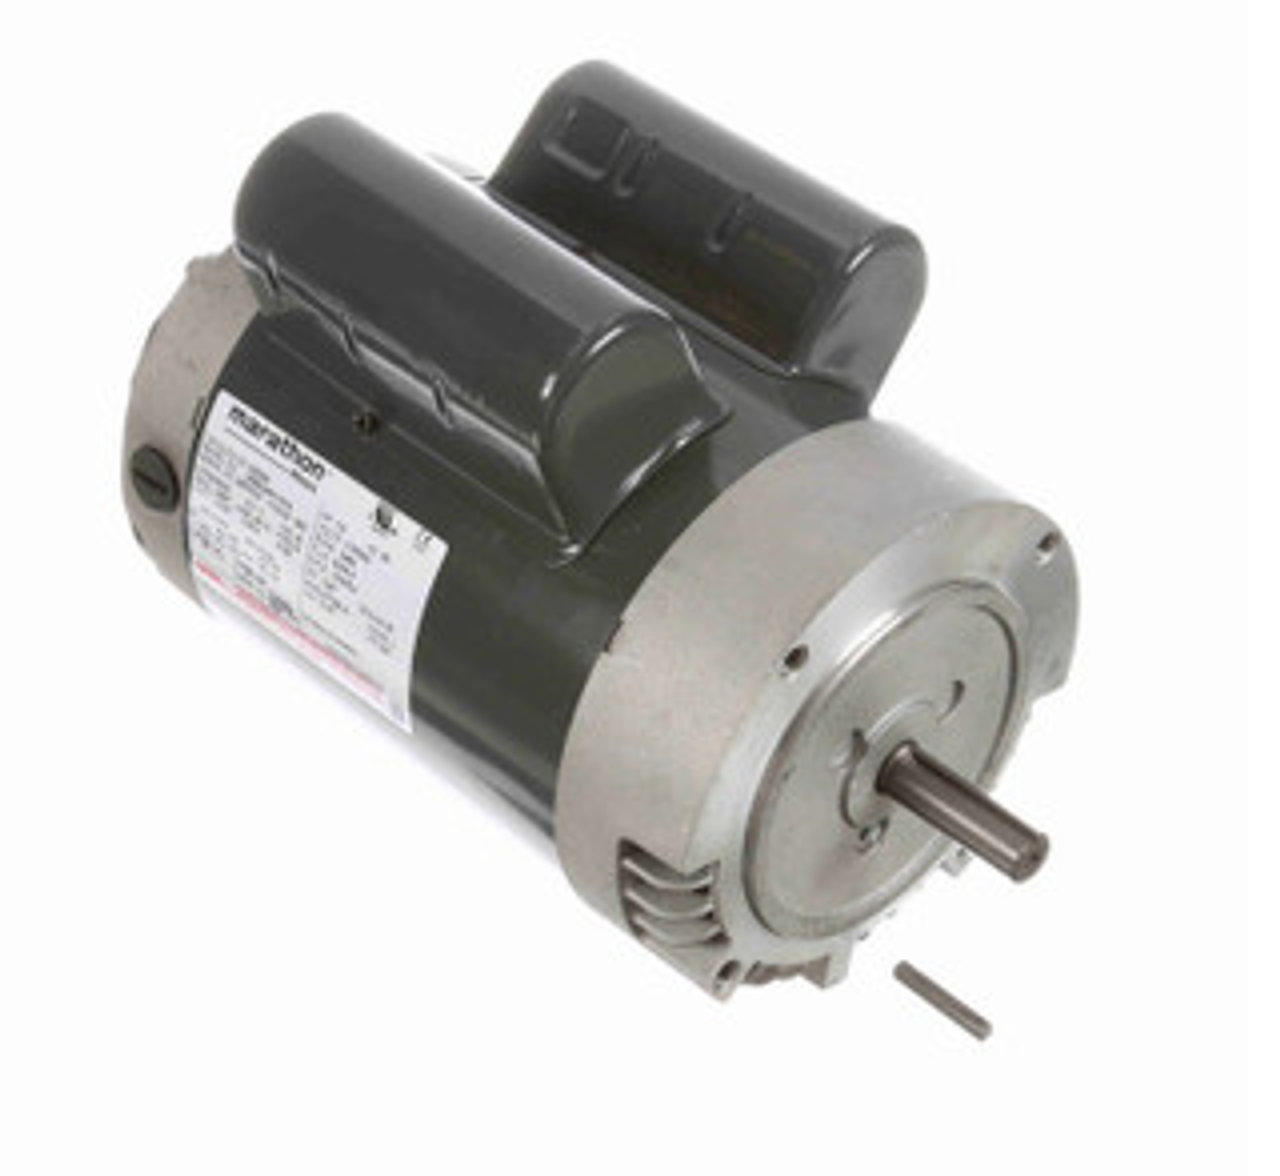 G254 Single Phase Dripproof C-Face Motor 1 HP